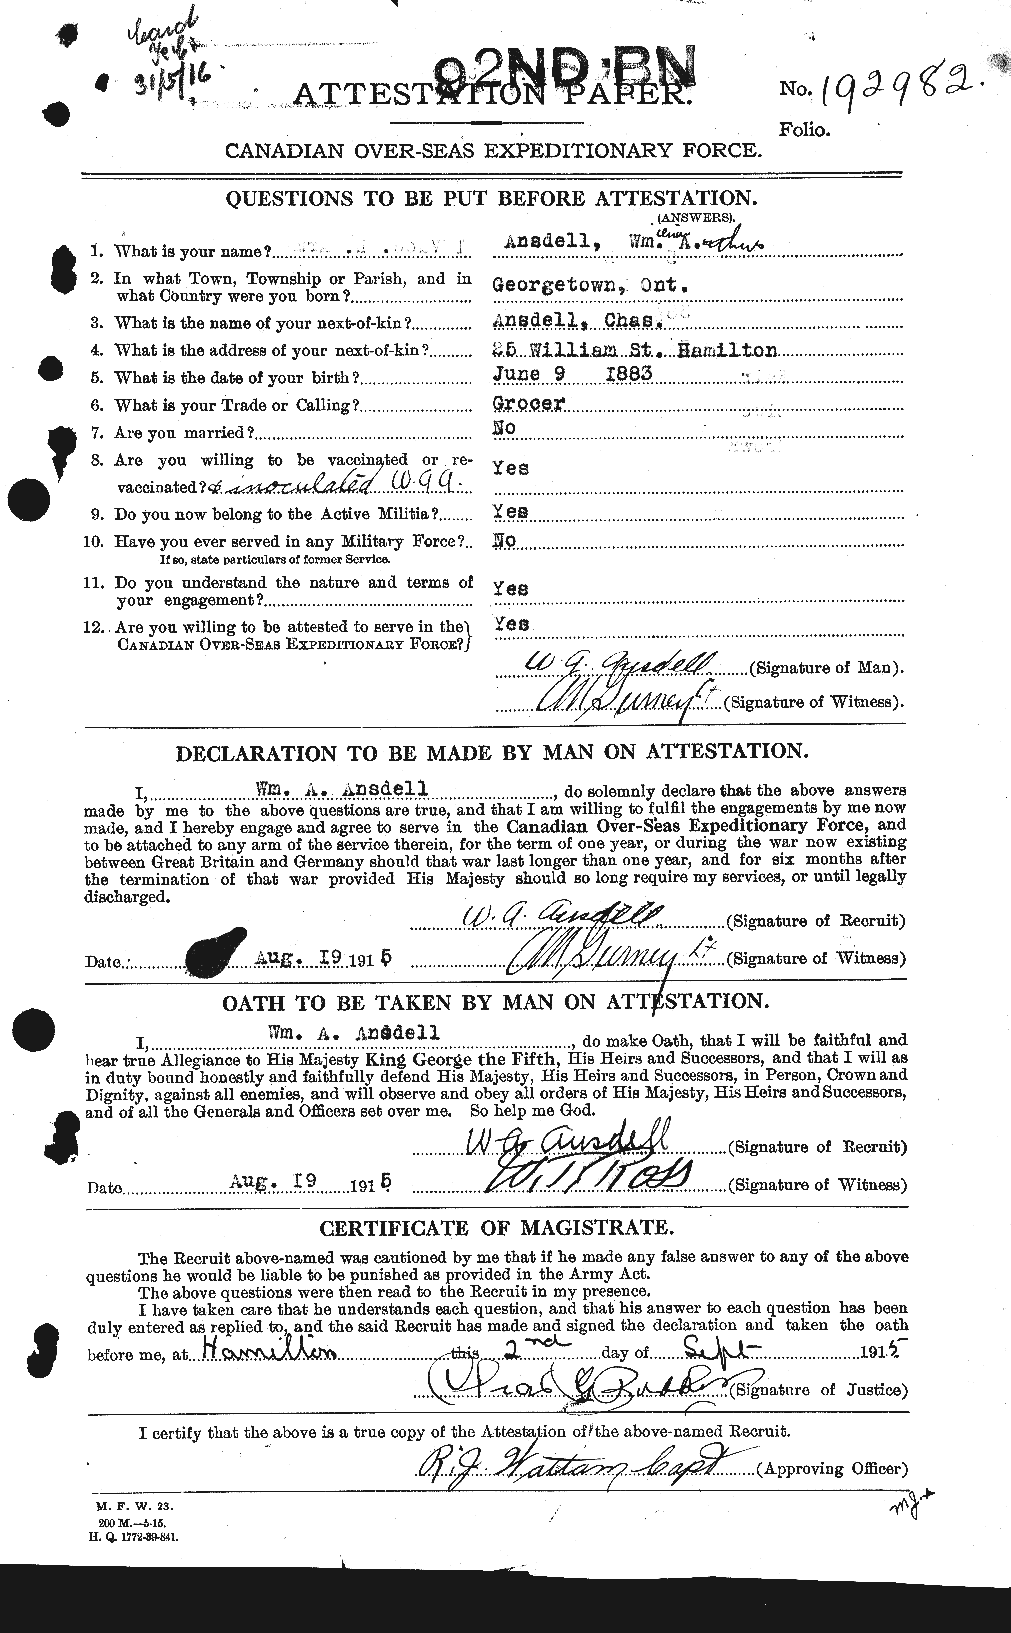 Personnel Records of the First World War - CEF 212358a